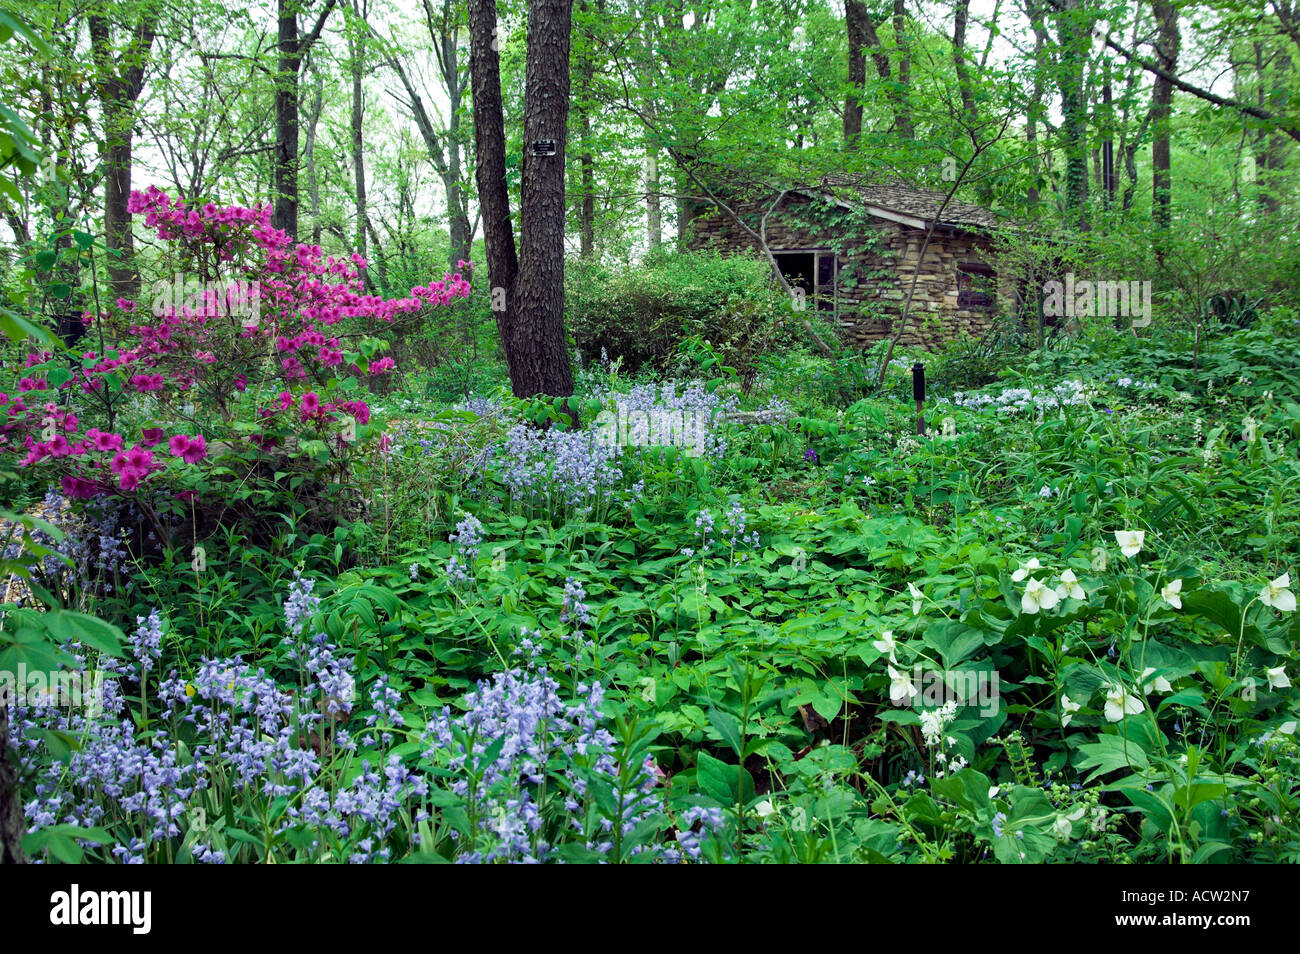 Deep pink azaleas and spring flowers bloom in a forest garden at the Cheekwood Botanical Gardens in Nashville Tennessee USA Stock Photo